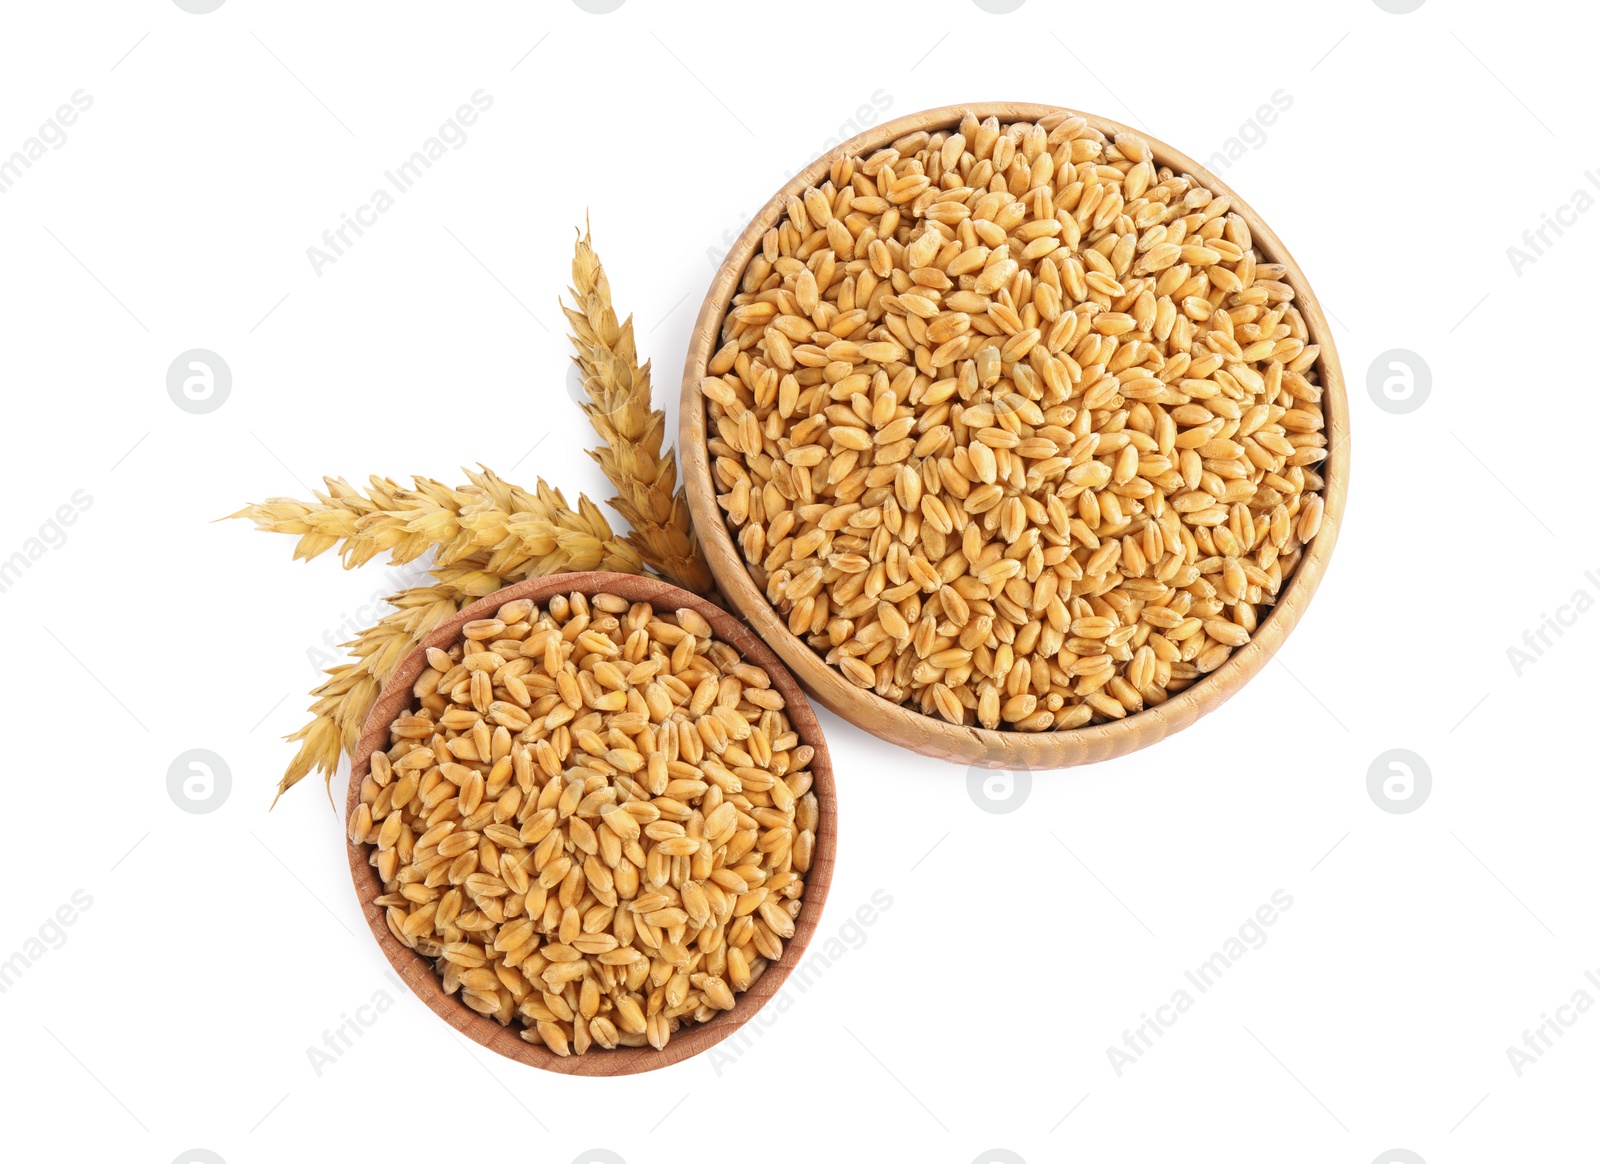 Photo of Wooden bowls with wheat grains and spikes on white background, top view